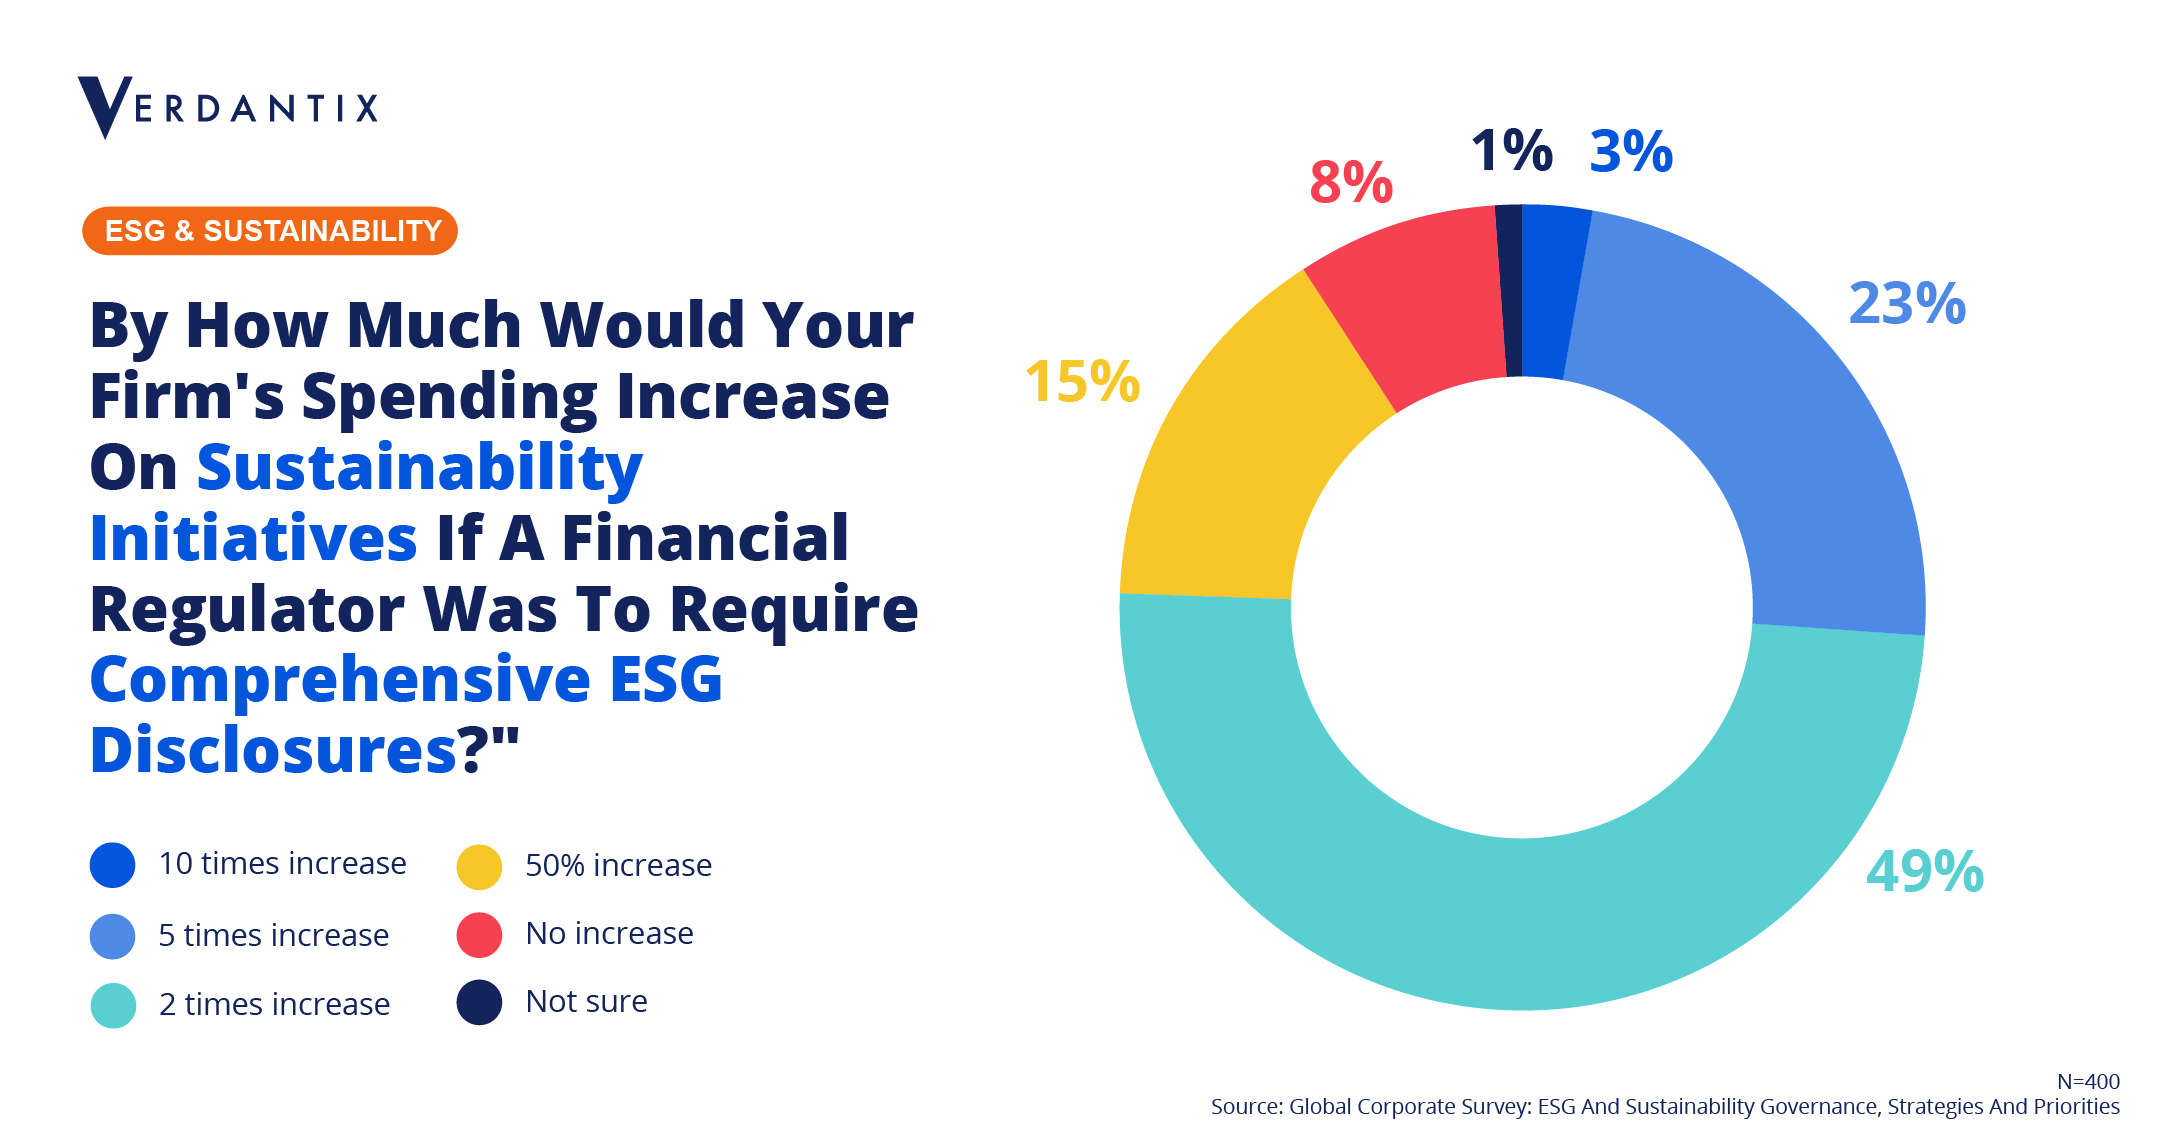 Survey Insight: Corporates Prepare For Significant Increases In Software & Services Spending To Align With Mandatory ESG Disclosures On The Horizon